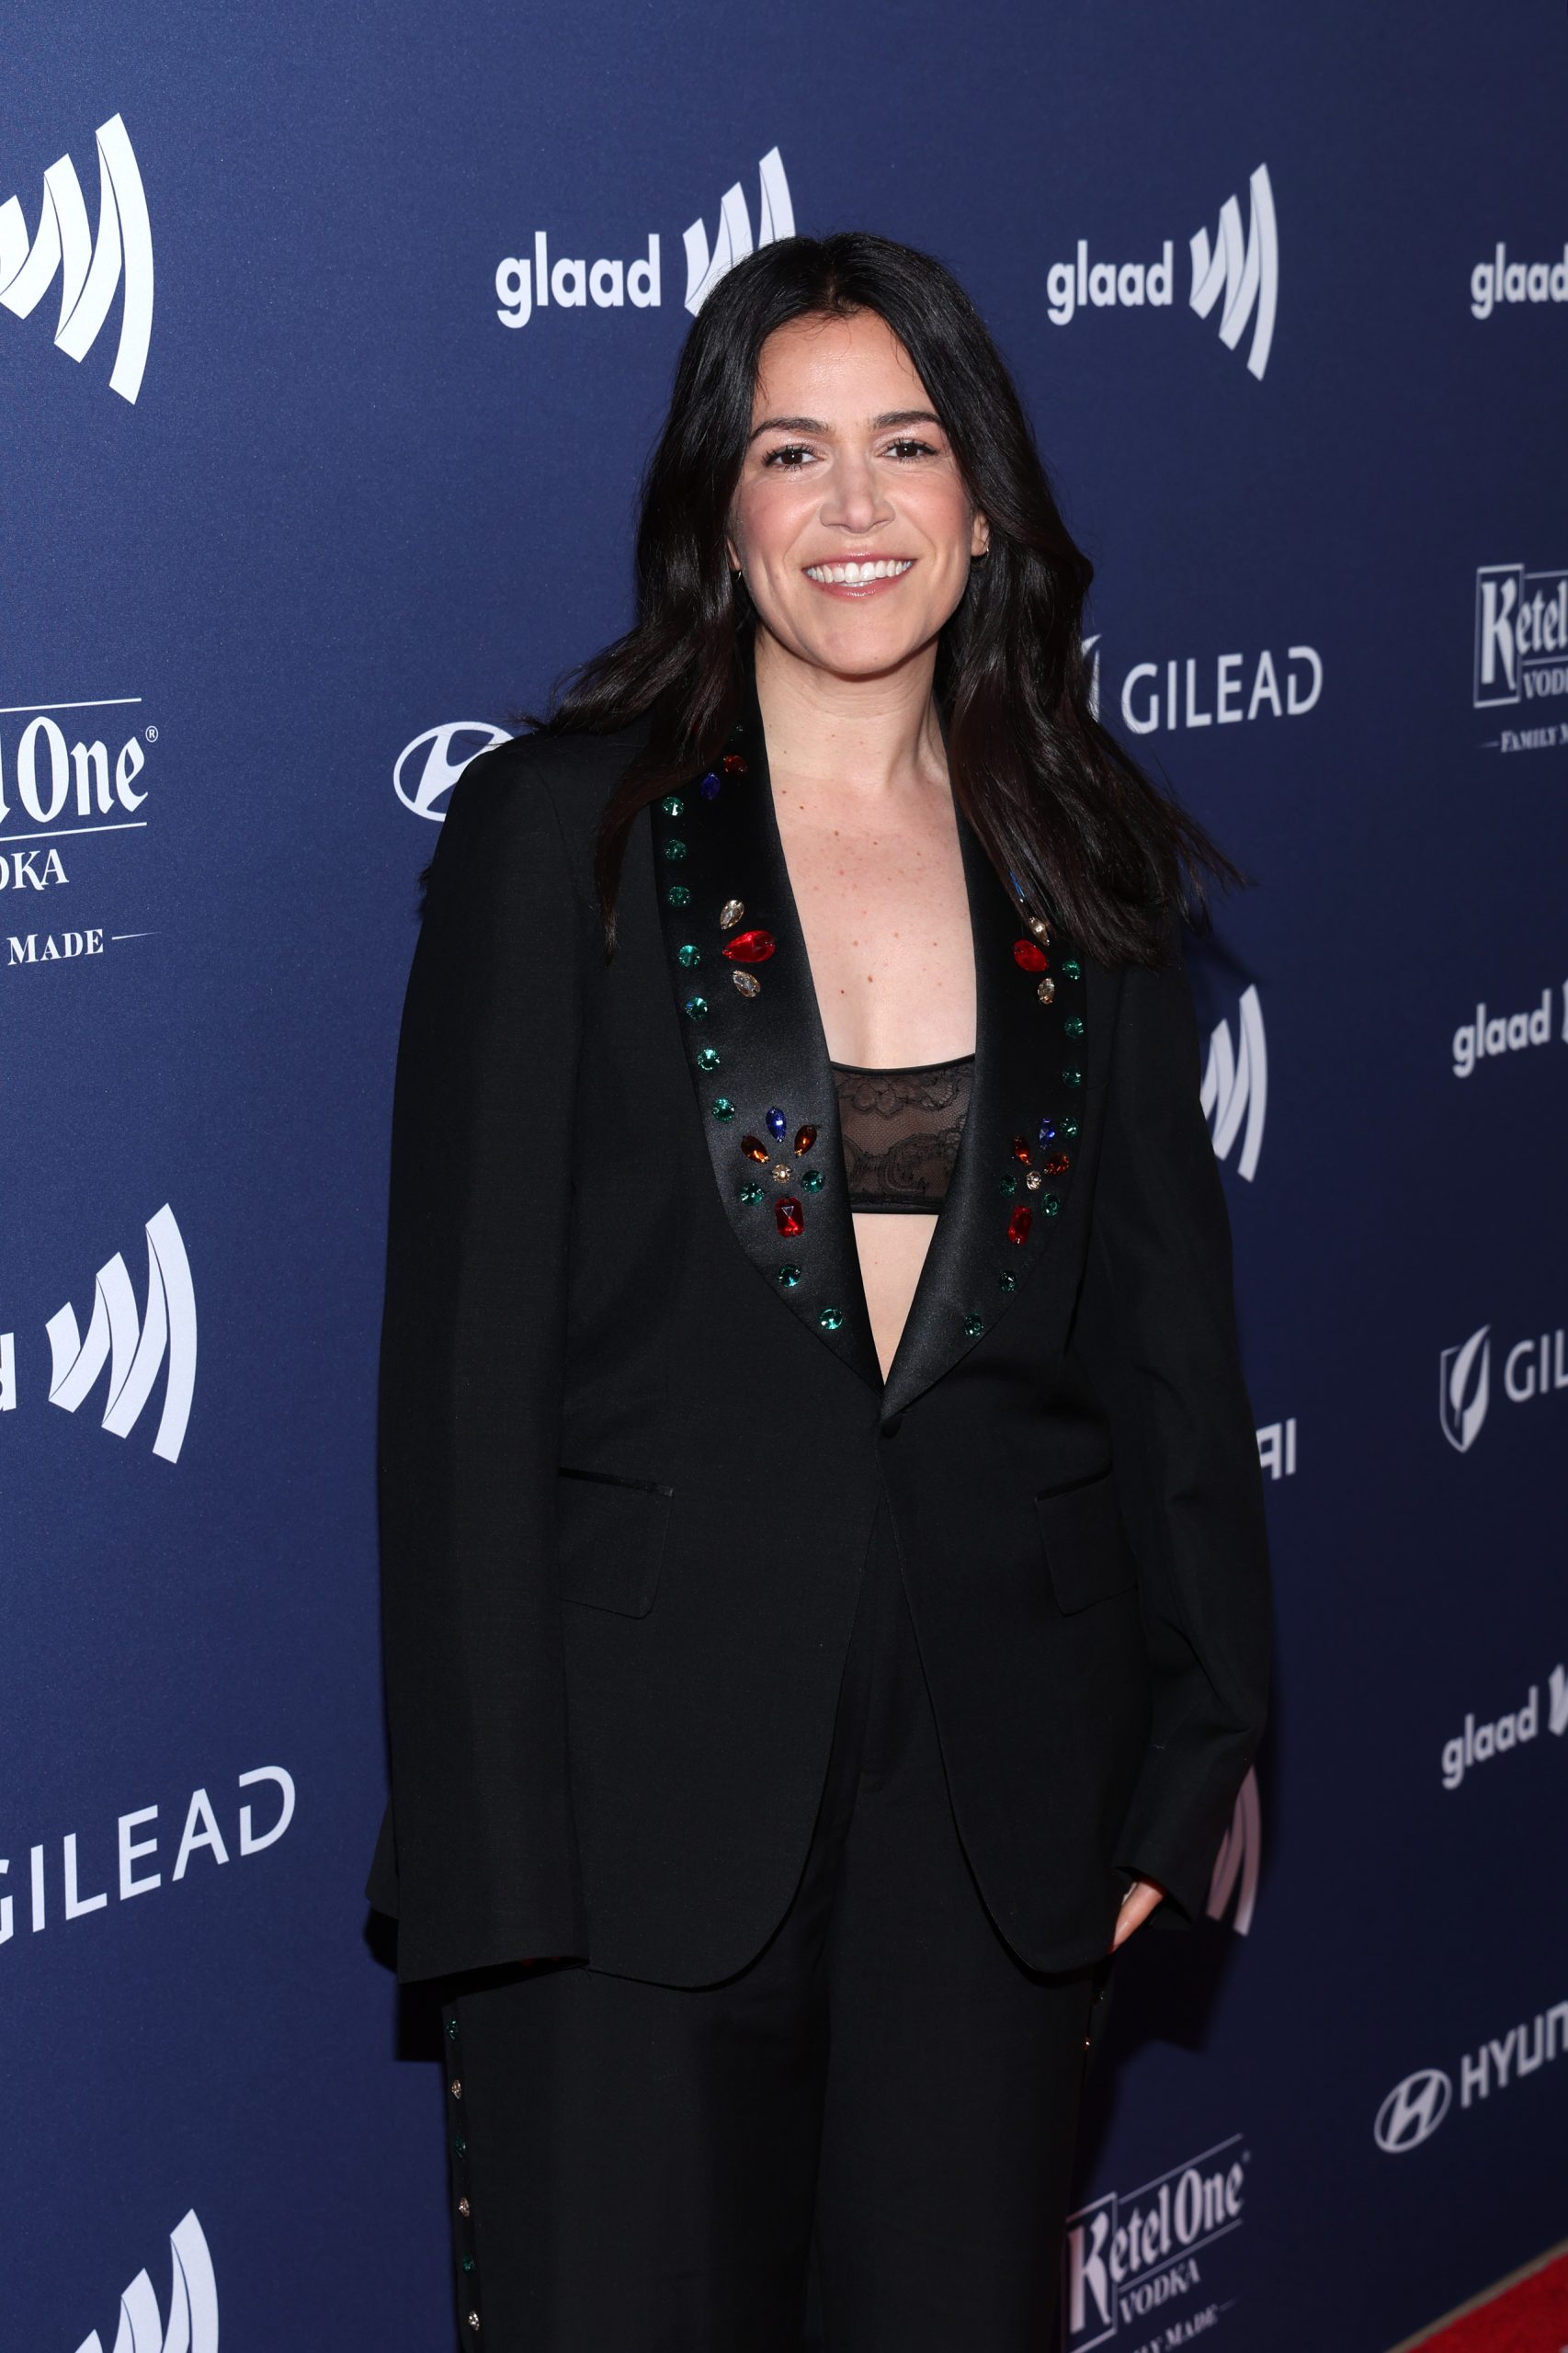 BEVERLY HILLS, CALIFORNIA - MARCH 30: Abbi Jacobson attends the 34th Annual GLAAD Media Awards Sponsored by Ketel One Family Made Vodka at The Beverly Hilton on March 30, 2023 in Beverly Hills, California. (Photo by Phillip Faraone/Getty Images for Ketel One)